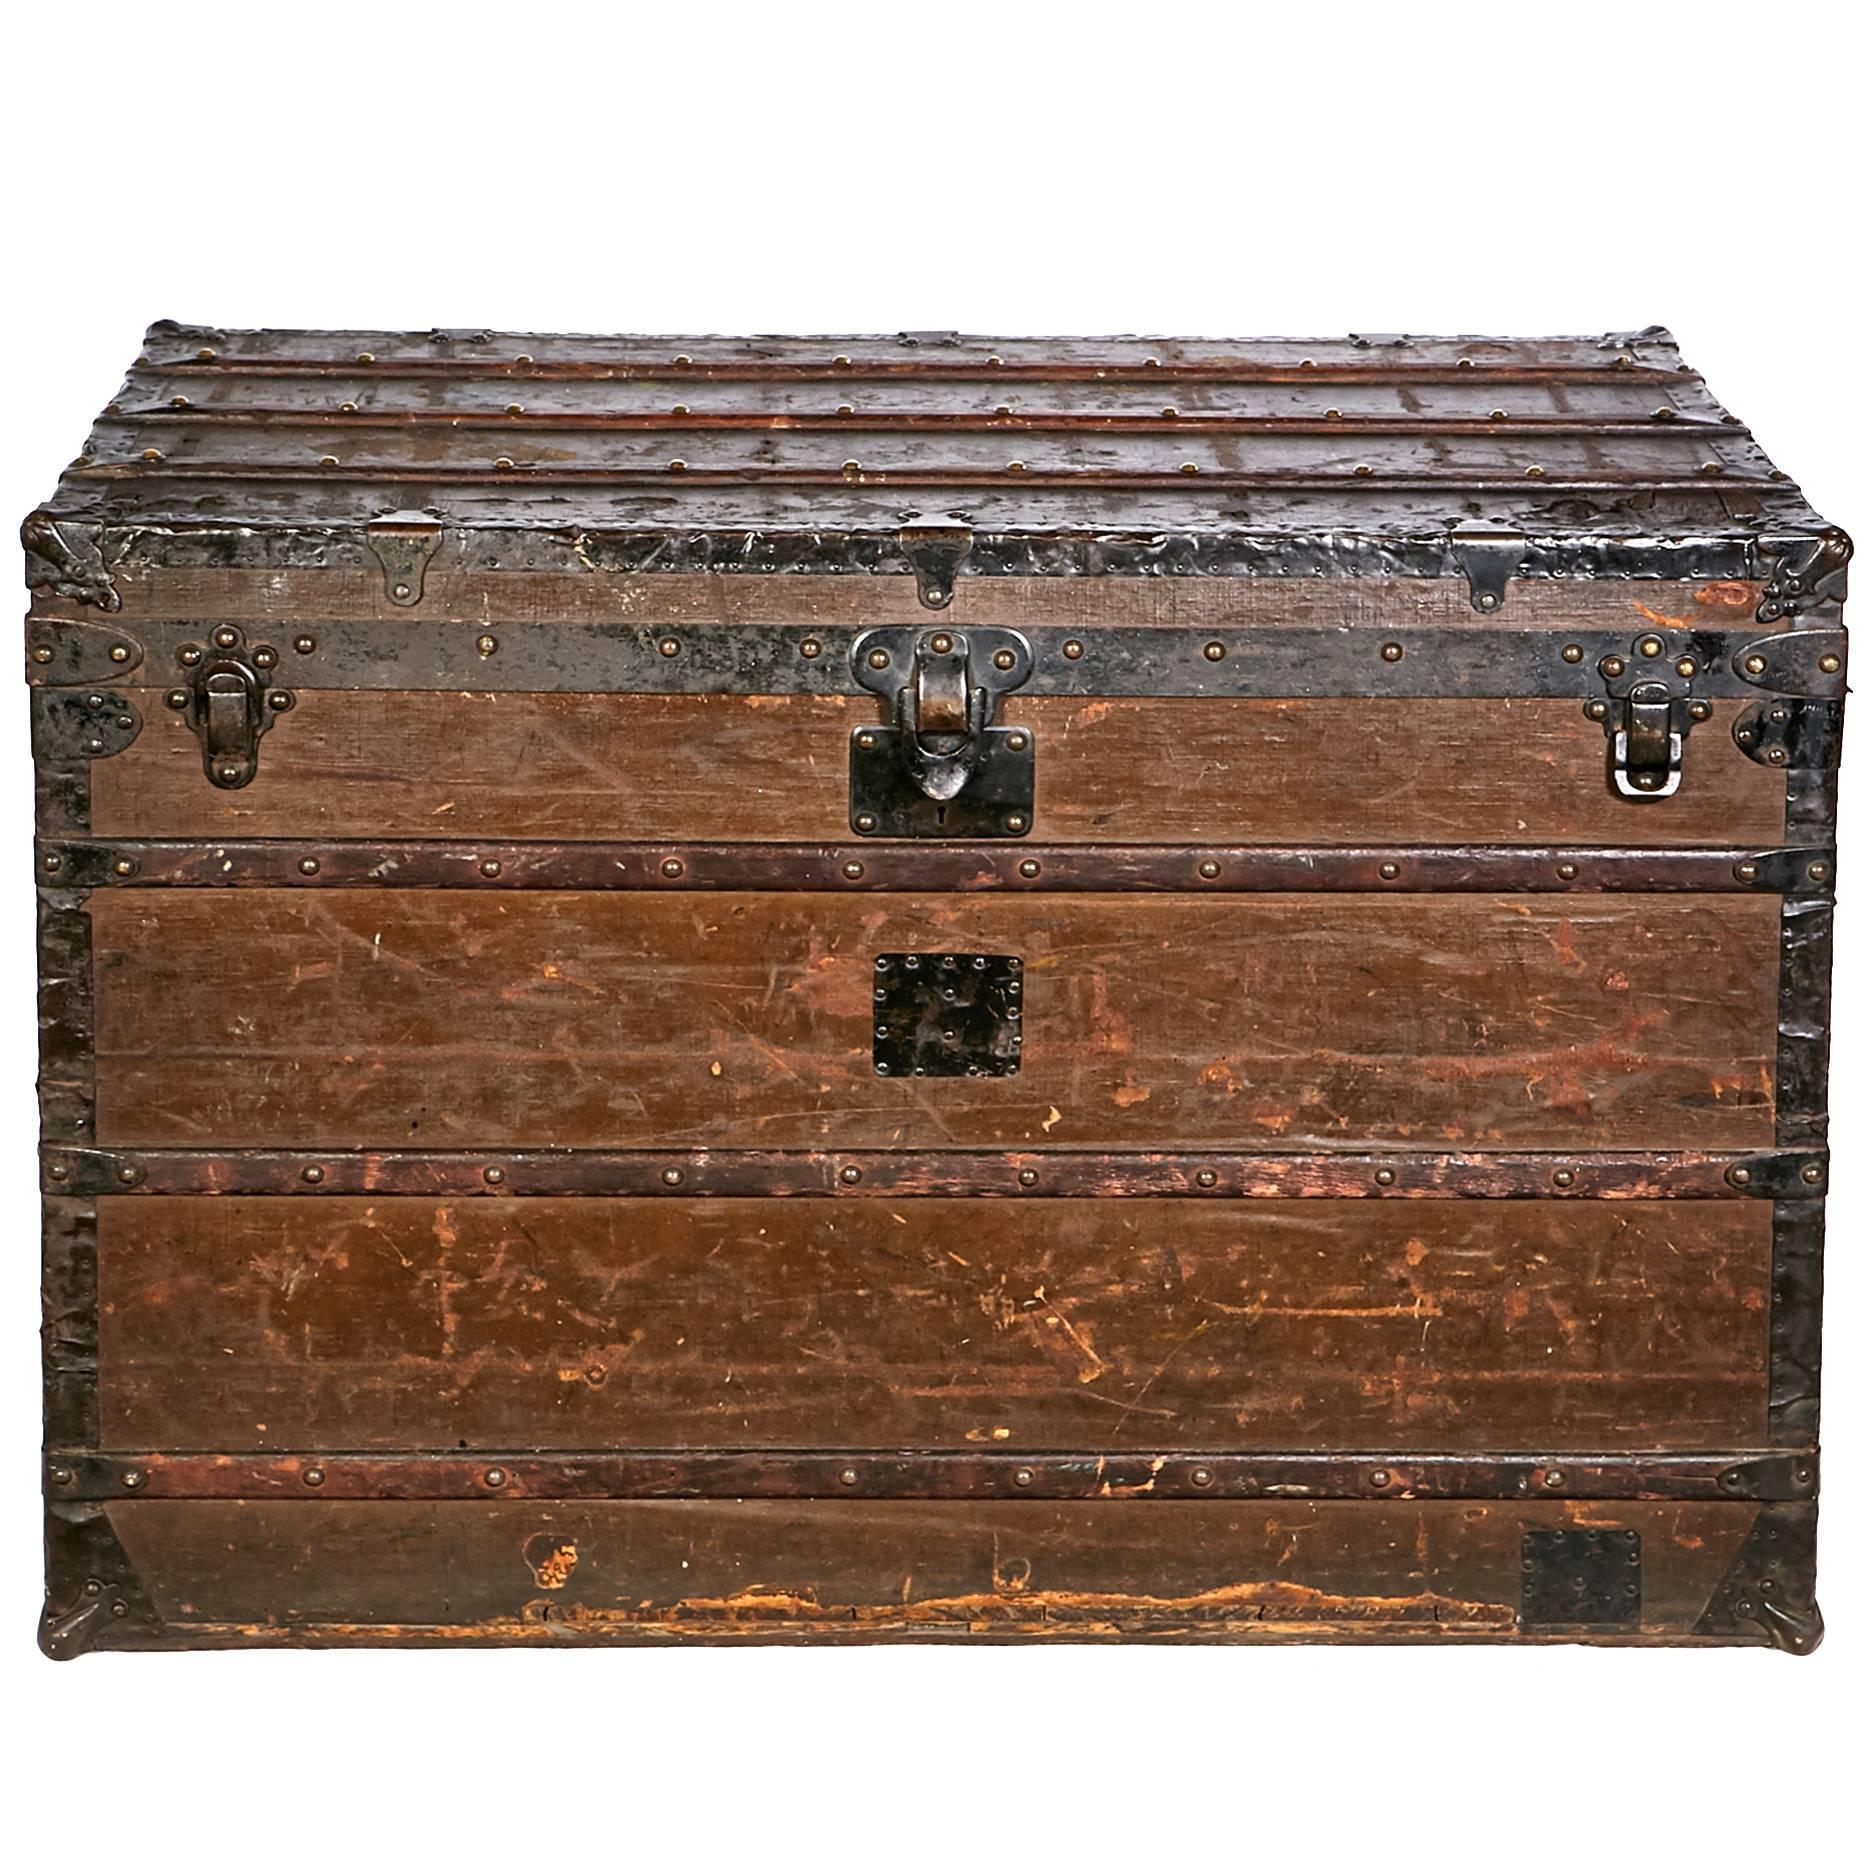 Early Louis Vuitton Wood Strap-Bound and Iron-Mounted Steamer Trunk